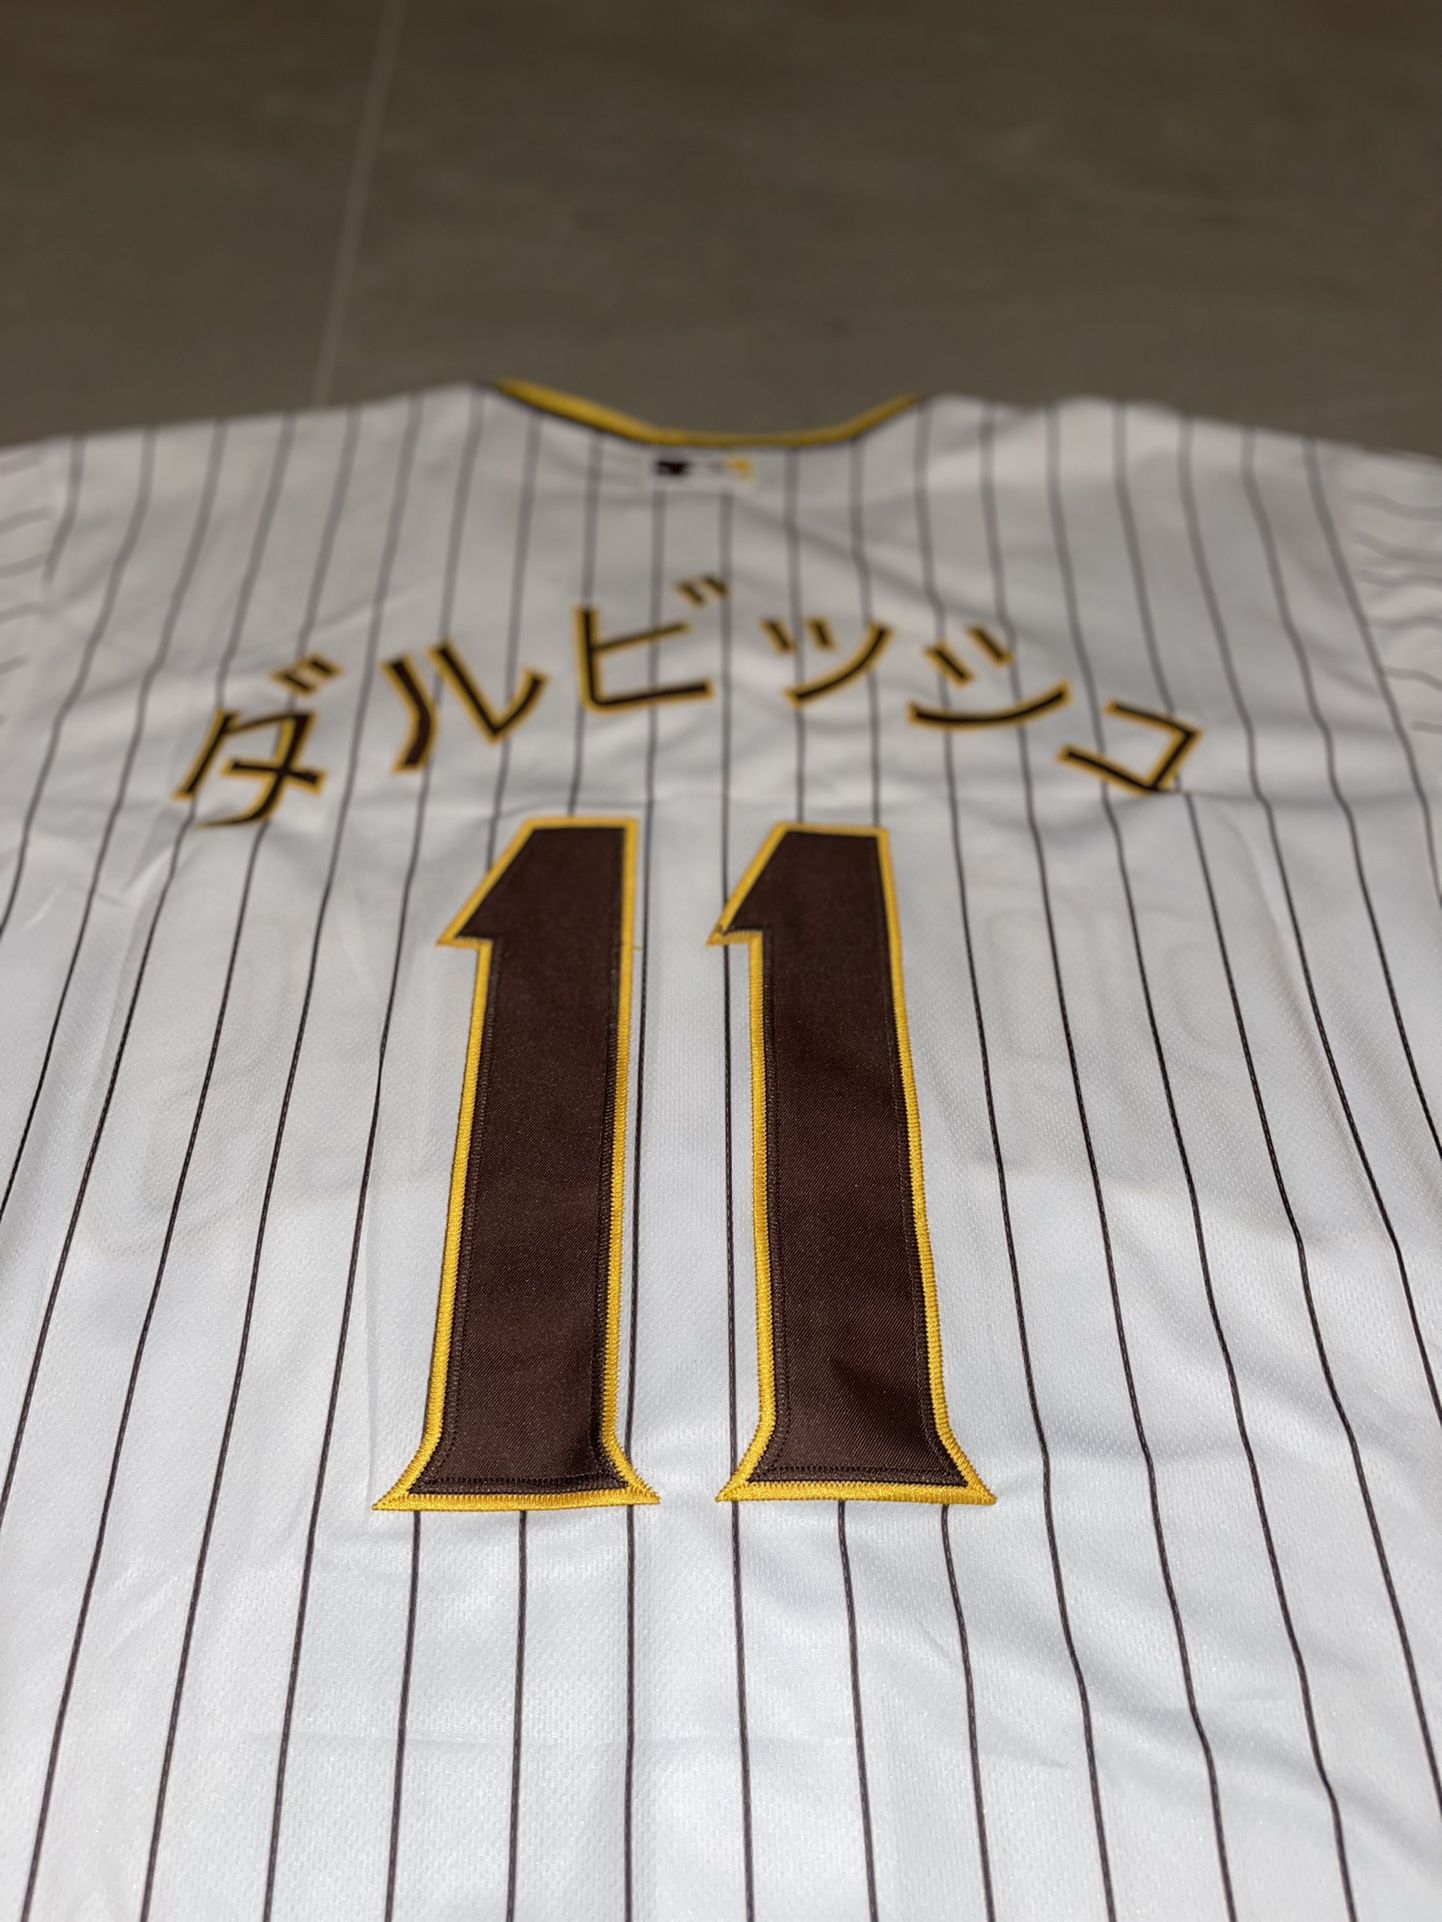 Padres White 1984 Throwback Jersey - Size Medium - New - $120 for Sale in San  Diego, CA - OfferUp